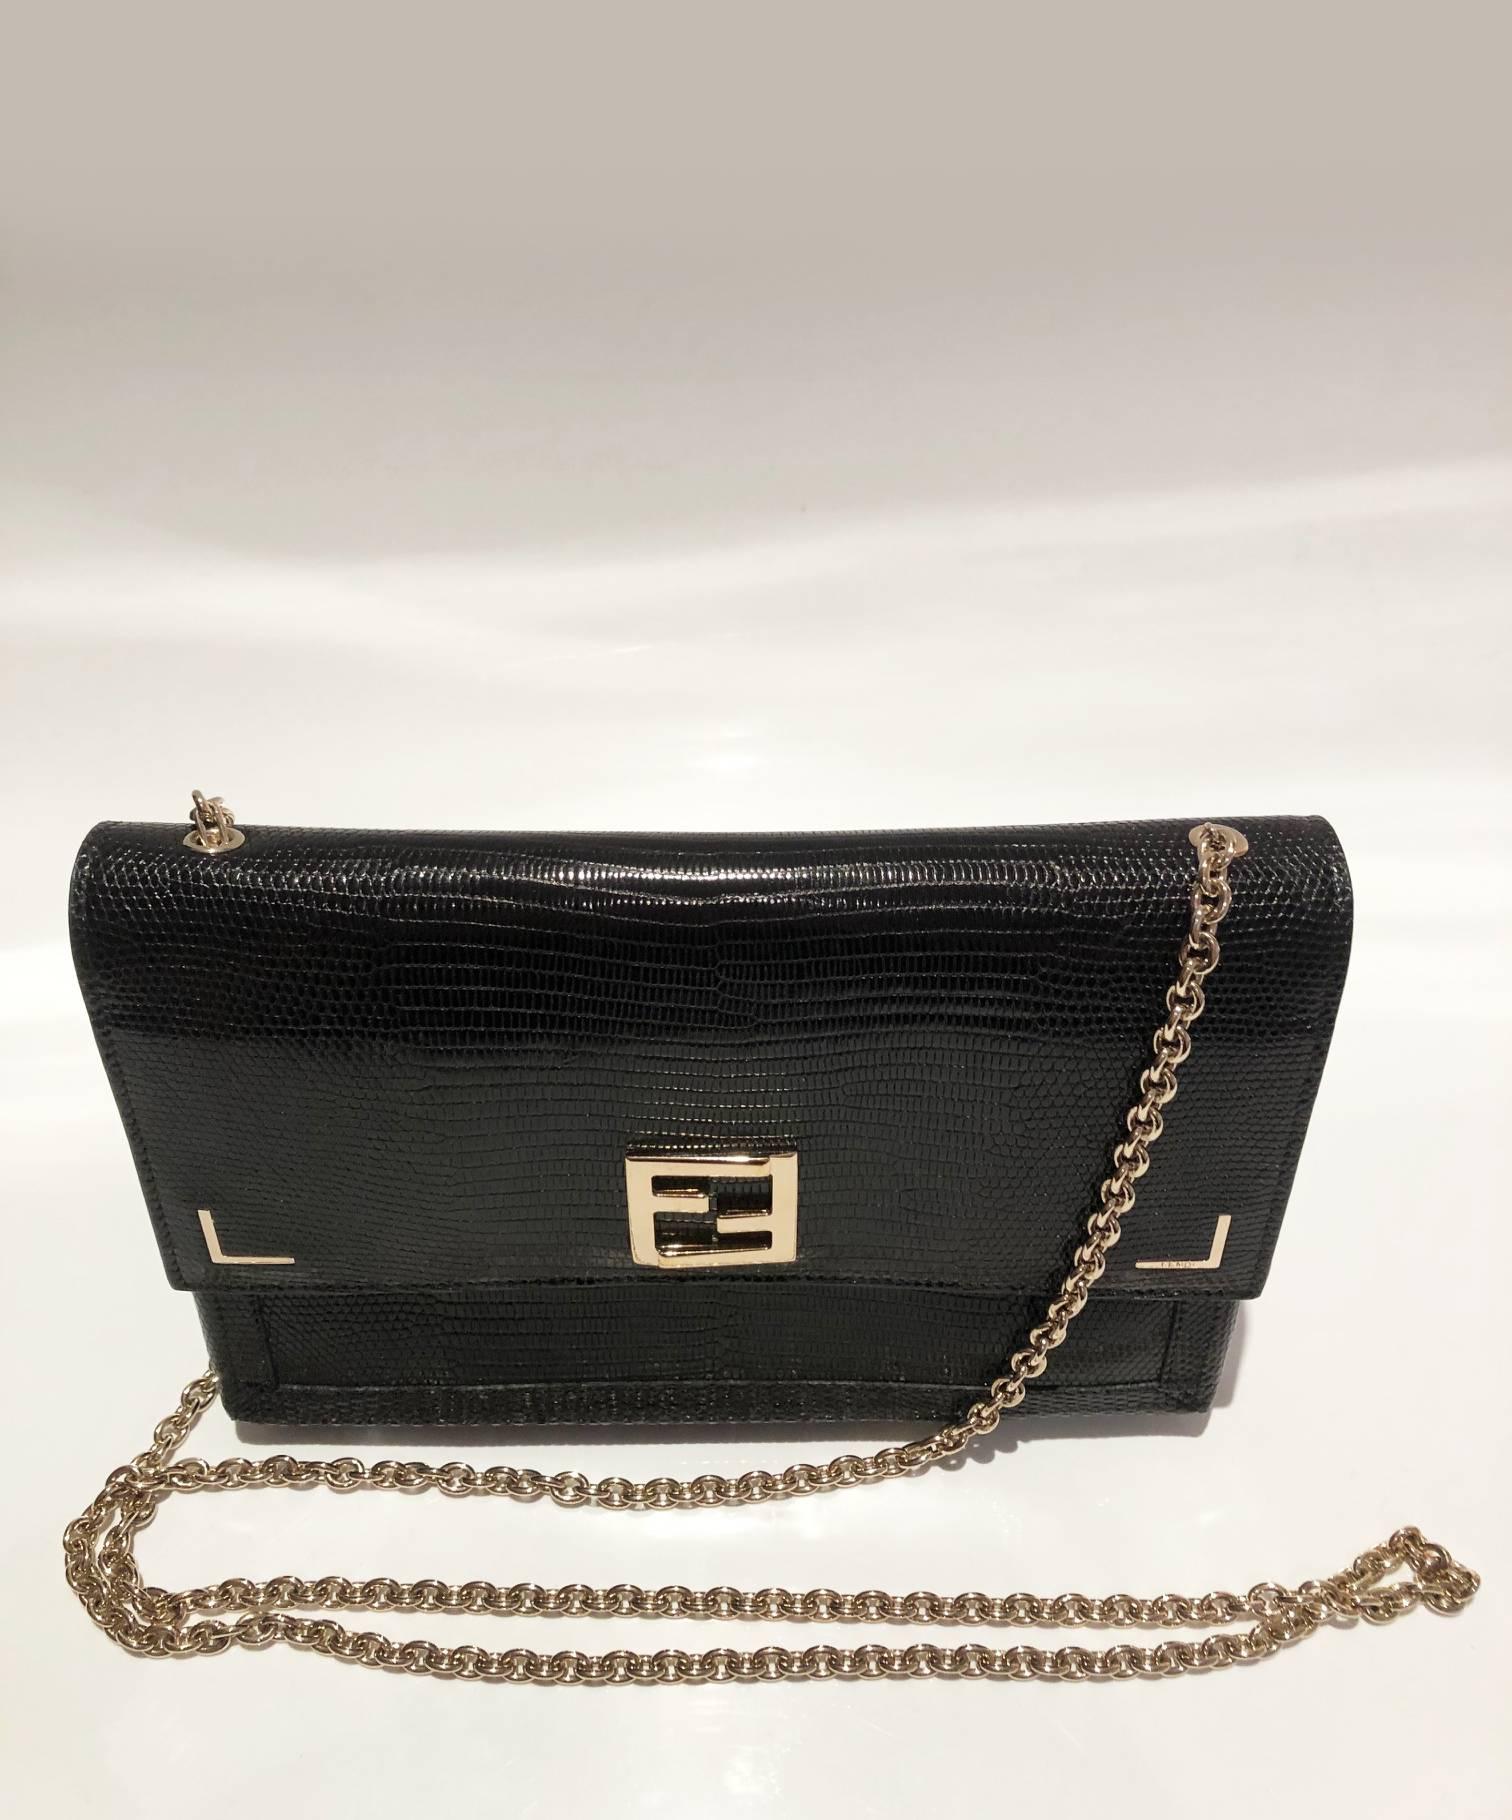 FREE UK and WORLDWIDE DELIVERY 
FENDI lizard print black leather shoulder bag featuring FF logo and metal-ware details on side, silver-tone chain, 6 internal compartments, one zipped interior pocket, flap clutch closure, made in Italy. It comes with